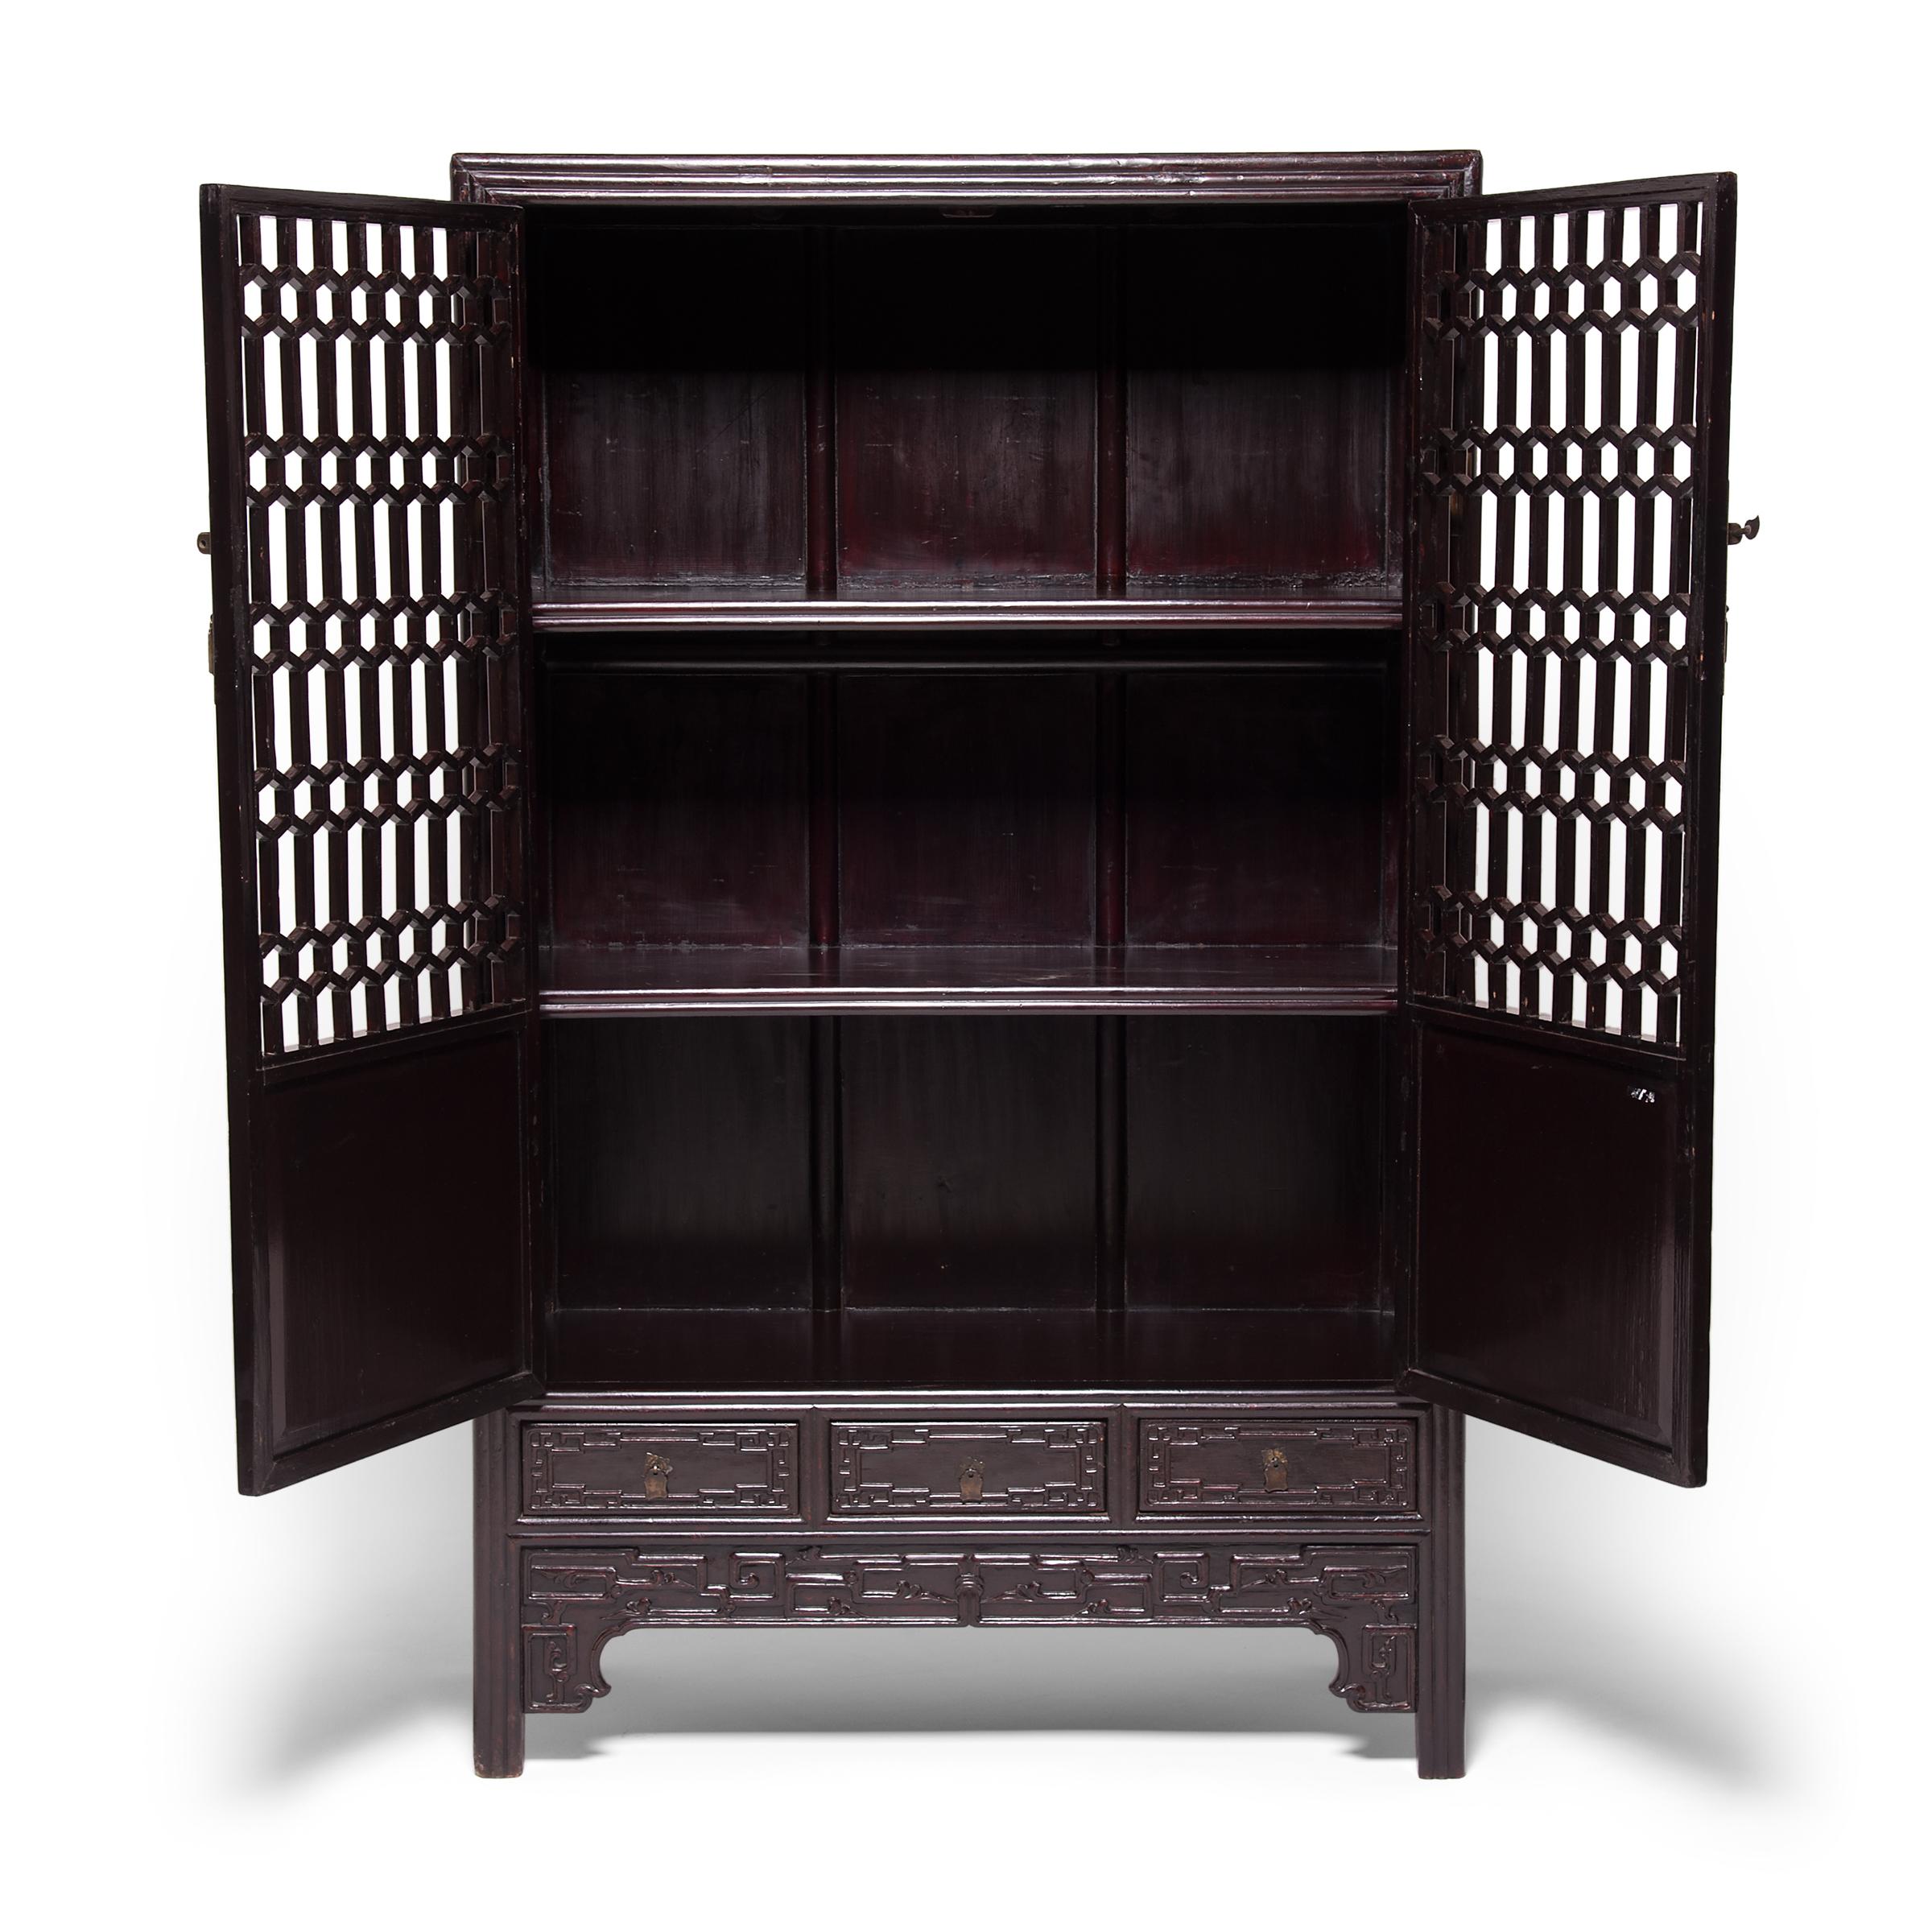 This beautiful early 19th century display cabinet from China's Henan province features complex honeycomb lattice panels and doors carved with elaborate scrollwork. Unlike fretwork made by carving or perforating a solid panel, this lattice would have